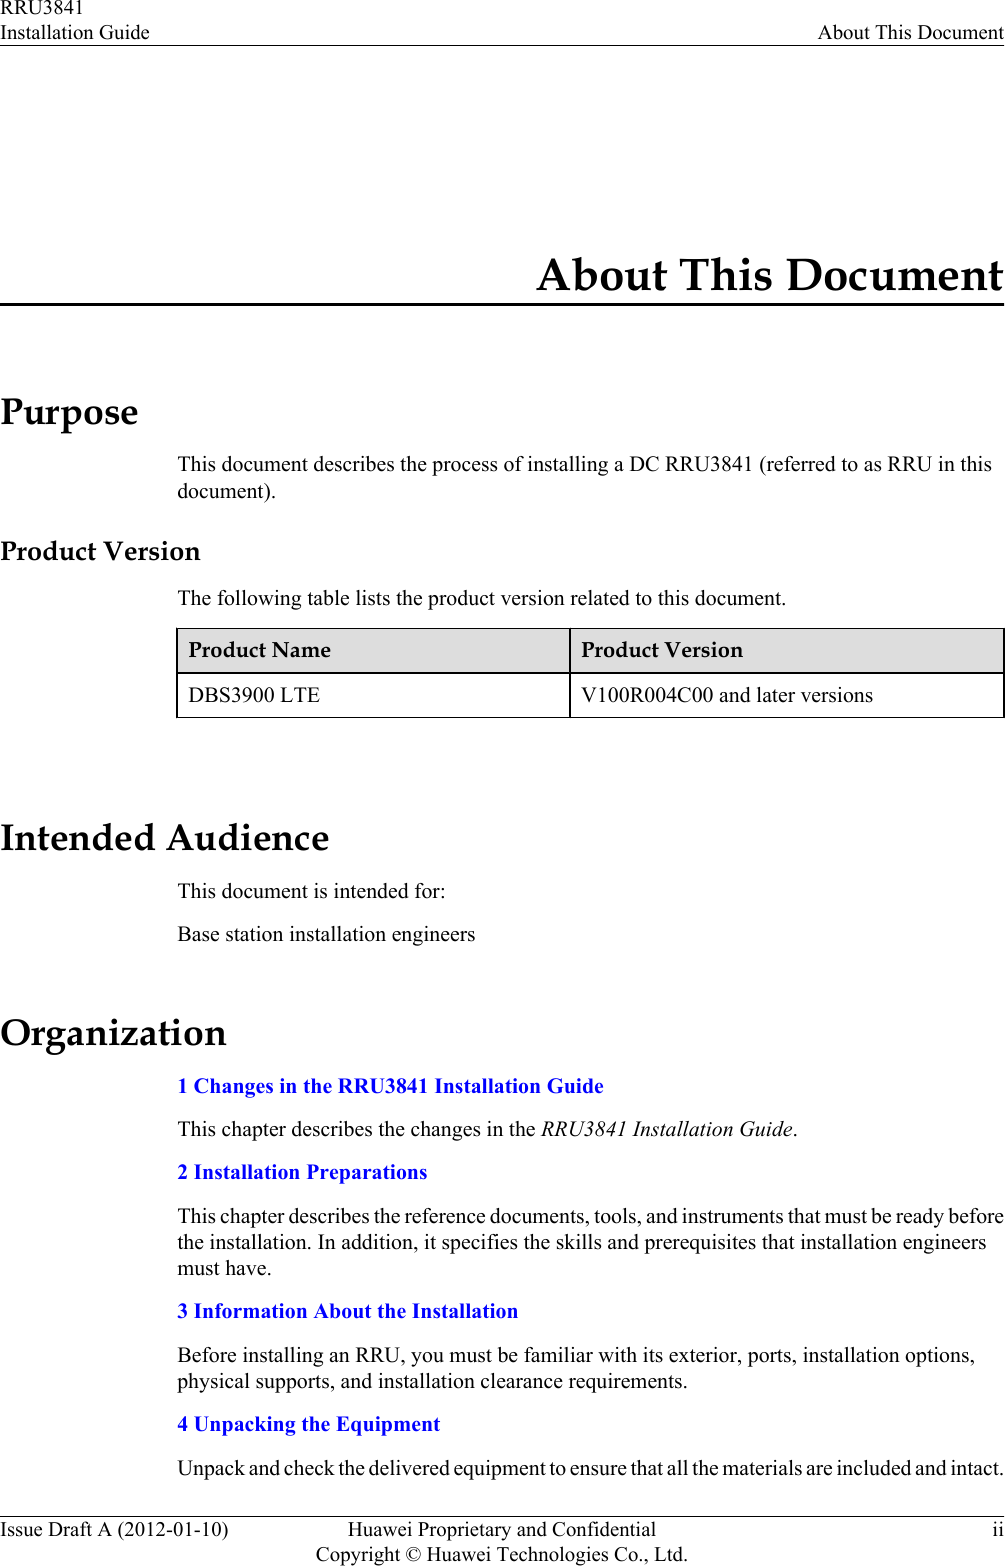 About This DocumentPurposeThis document describes the process of installing a DC RRU3841 (referred to as RRU in thisdocument).Product VersionThe following table lists the product version related to this document.Product Name Product VersionDBS3900 LTE V100R004C00 and later versions Intended AudienceThis document is intended for:Base station installation engineersOrganization1 Changes in the RRU3841 Installation GuideThis chapter describes the changes in the RRU3841 Installation Guide.2 Installation PreparationsThis chapter describes the reference documents, tools, and instruments that must be ready beforethe installation. In addition, it specifies the skills and prerequisites that installation engineersmust have.3 Information About the InstallationBefore installing an RRU, you must be familiar with its exterior, ports, installation options,physical supports, and installation clearance requirements.4 Unpacking the EquipmentUnpack and check the delivered equipment to ensure that all the materials are included and intact.RRU3841Installation Guide About This DocumentIssue Draft A (2012-01-10) Huawei Proprietary and ConfidentialCopyright © Huawei Technologies Co., Ltd.ii